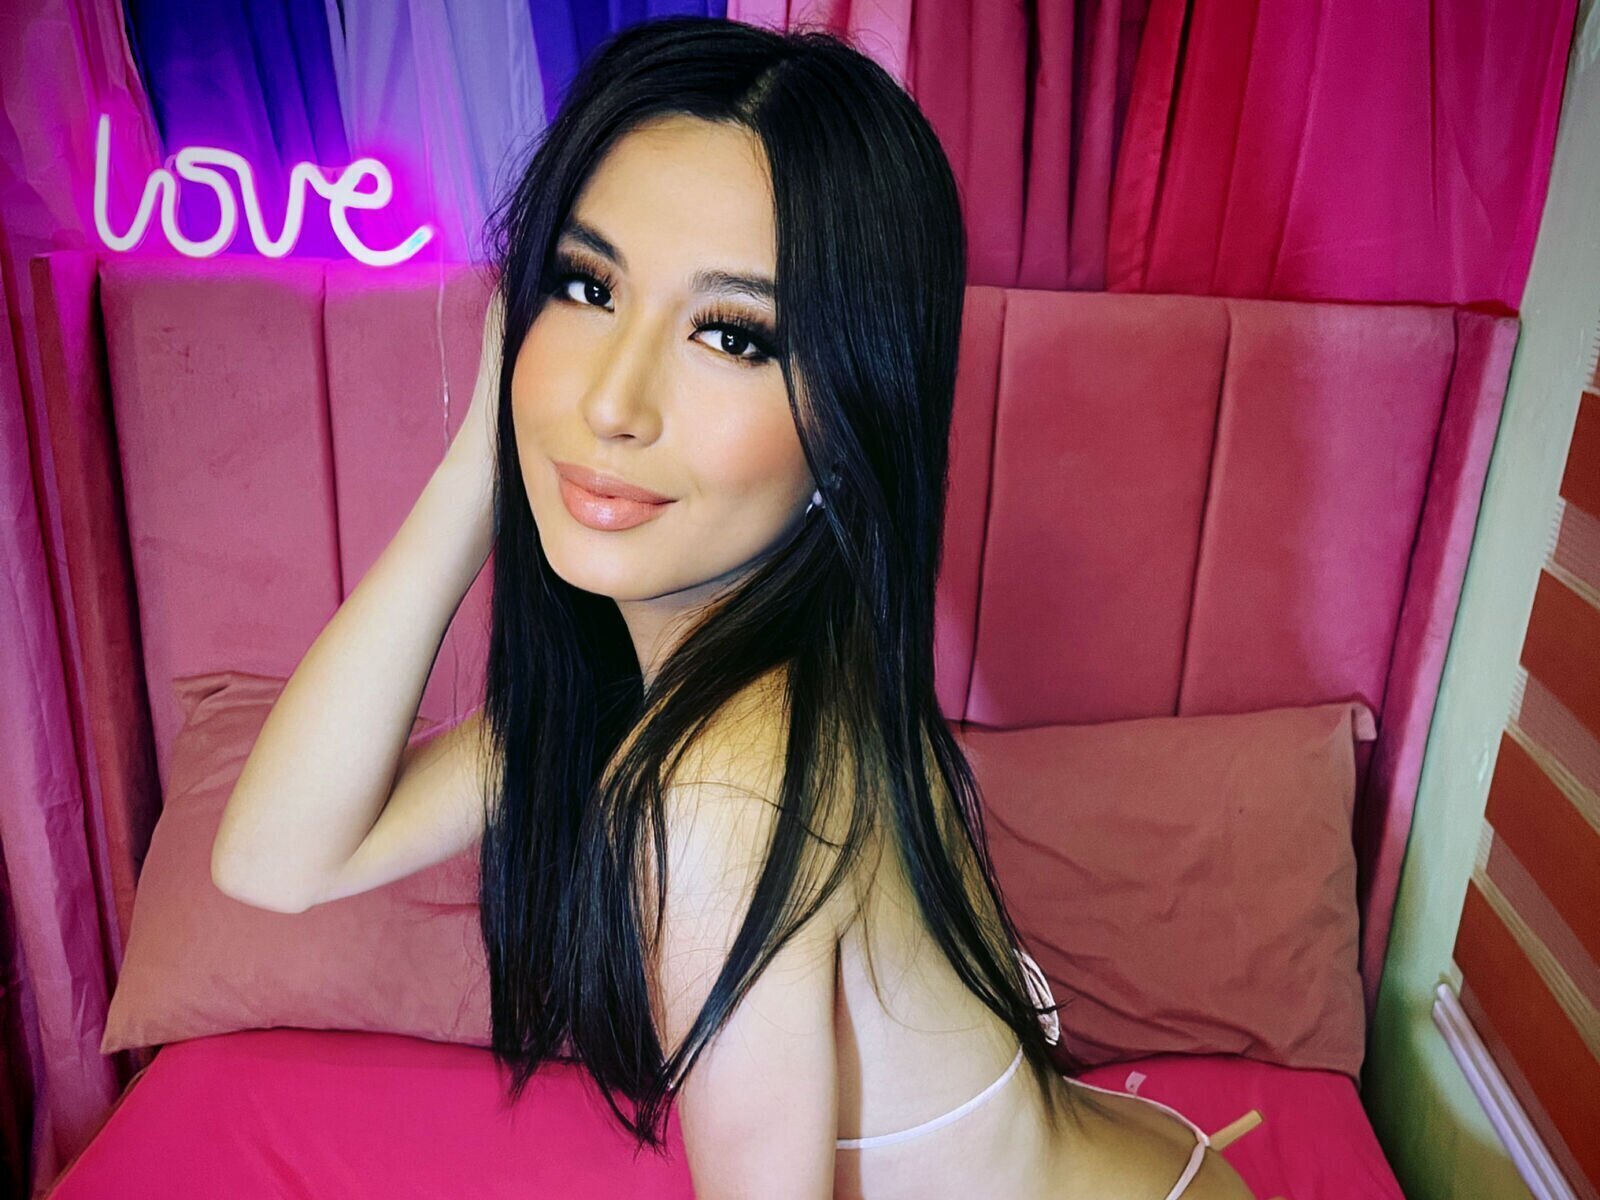 Free Live Sex Chat With MilesHererra